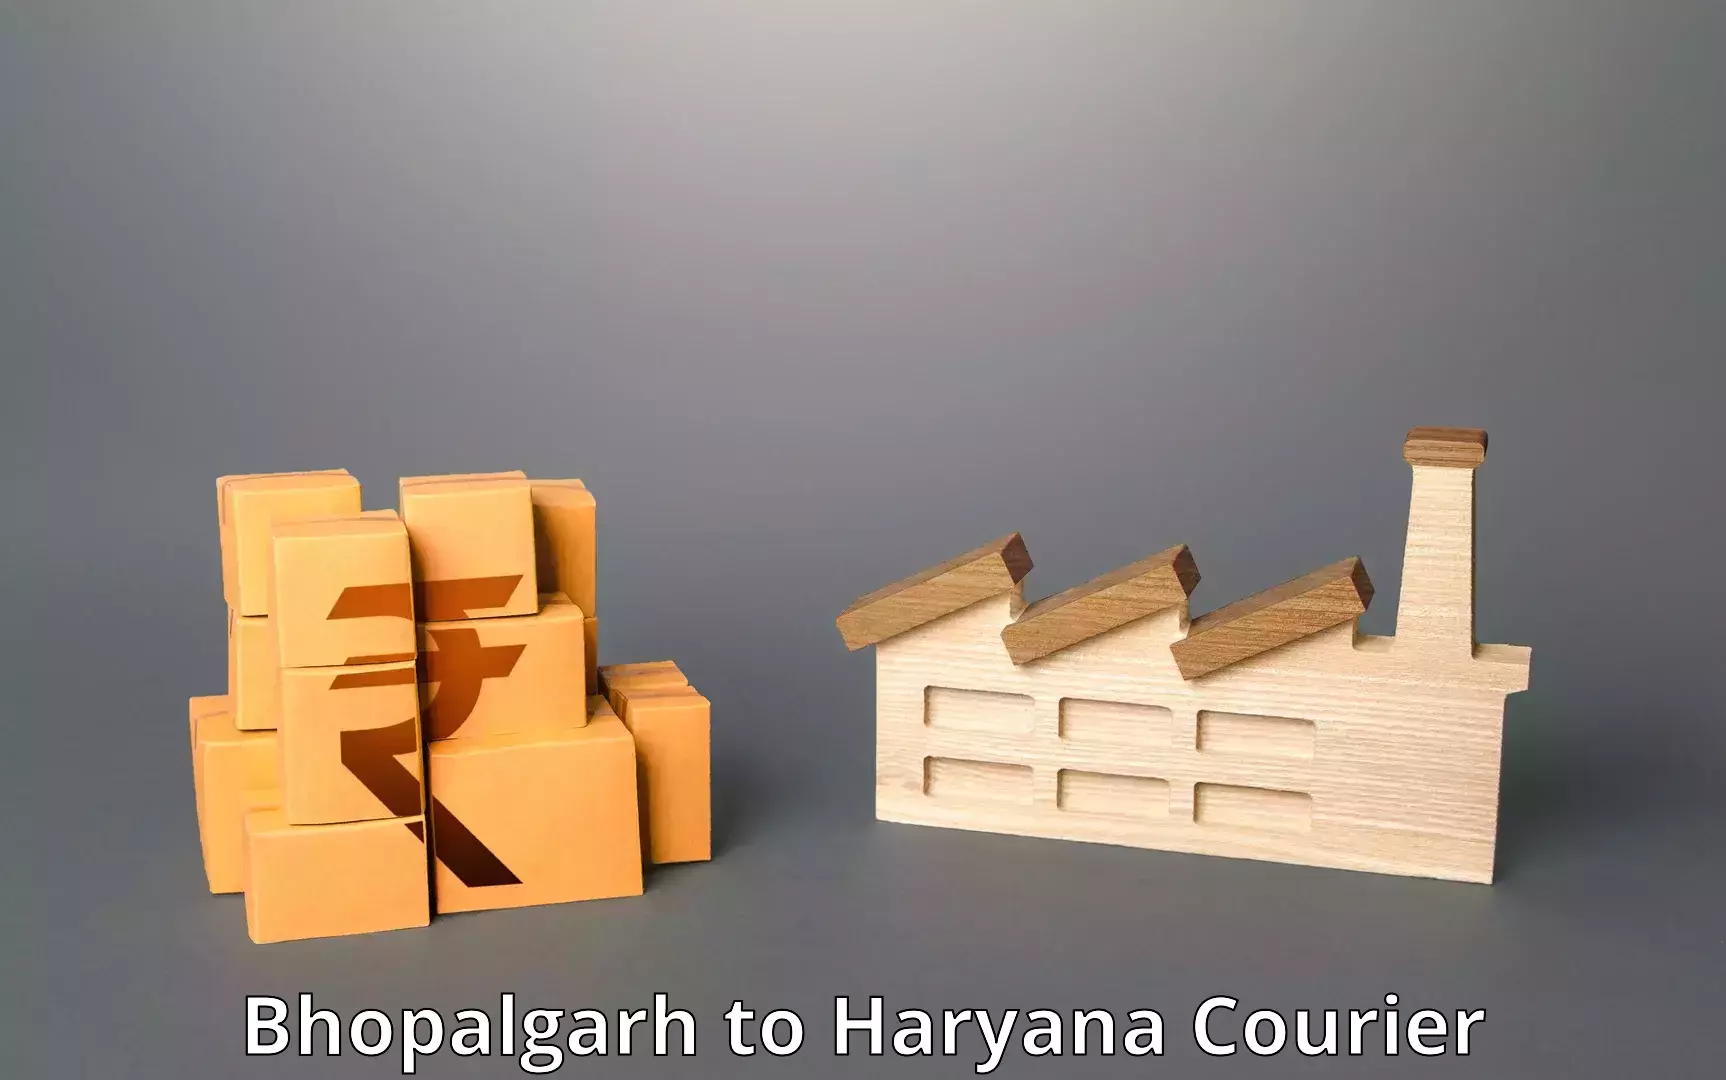 On-demand delivery Bhopalgarh to Sonipat